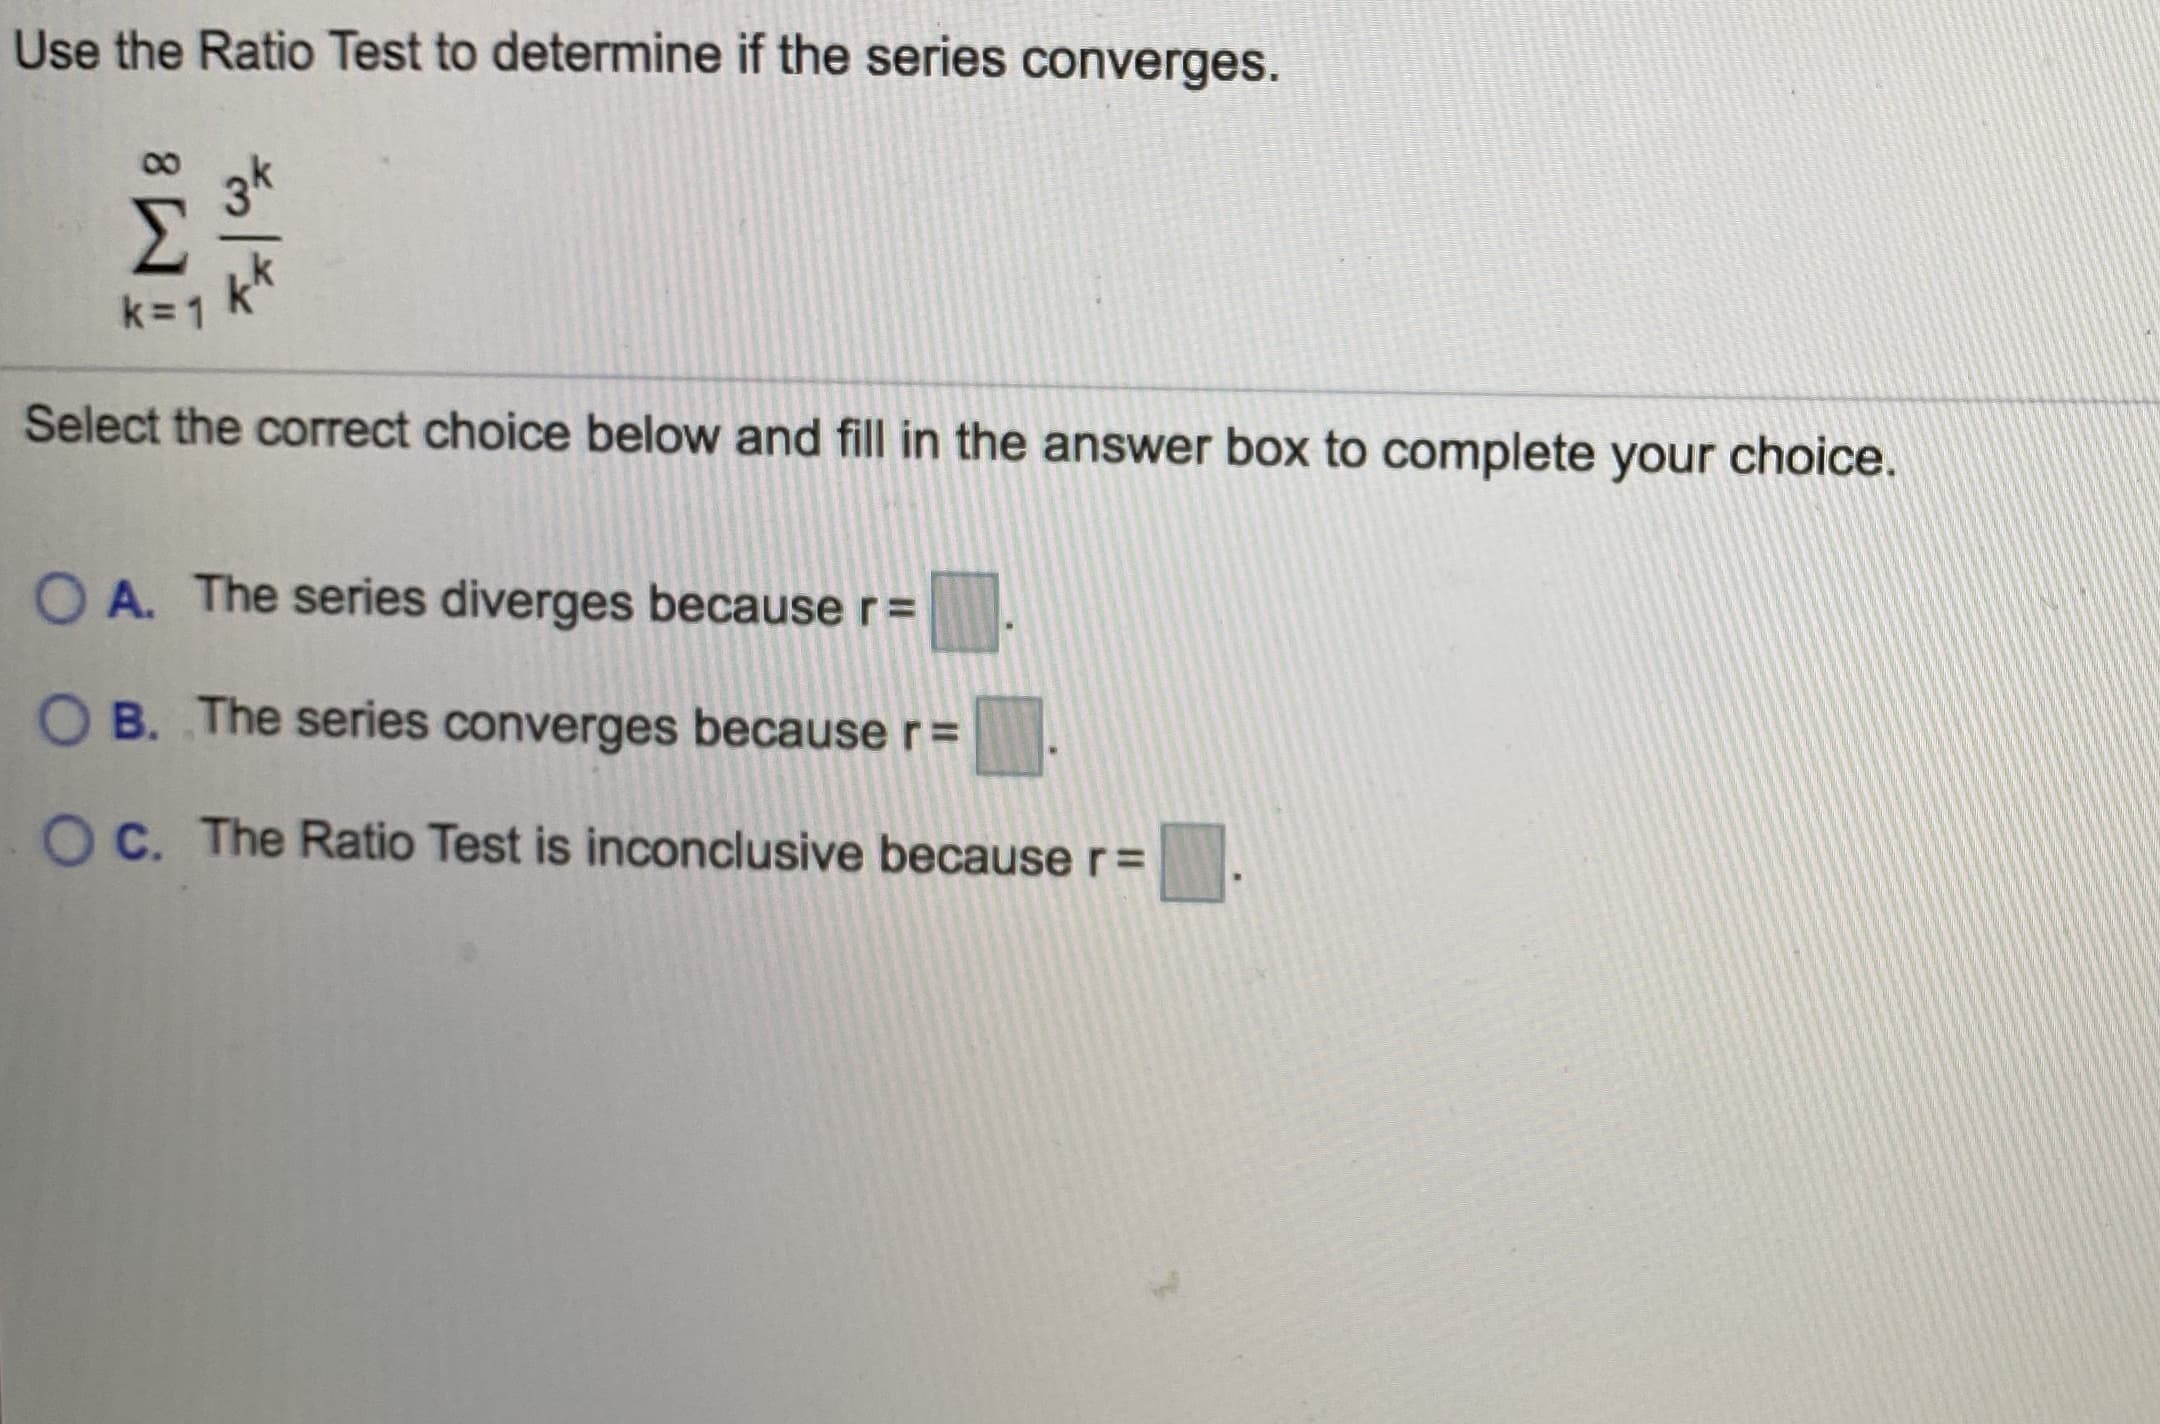 Use the Ratio Test to determine if the series converges.
3k
k=1
Select the correct choice below and fill in the answer box to complete your choice.
O A. The series diverges because r=
O B. The series converges because r%3D
O C. The Ratio Test is inconclusive because r=
